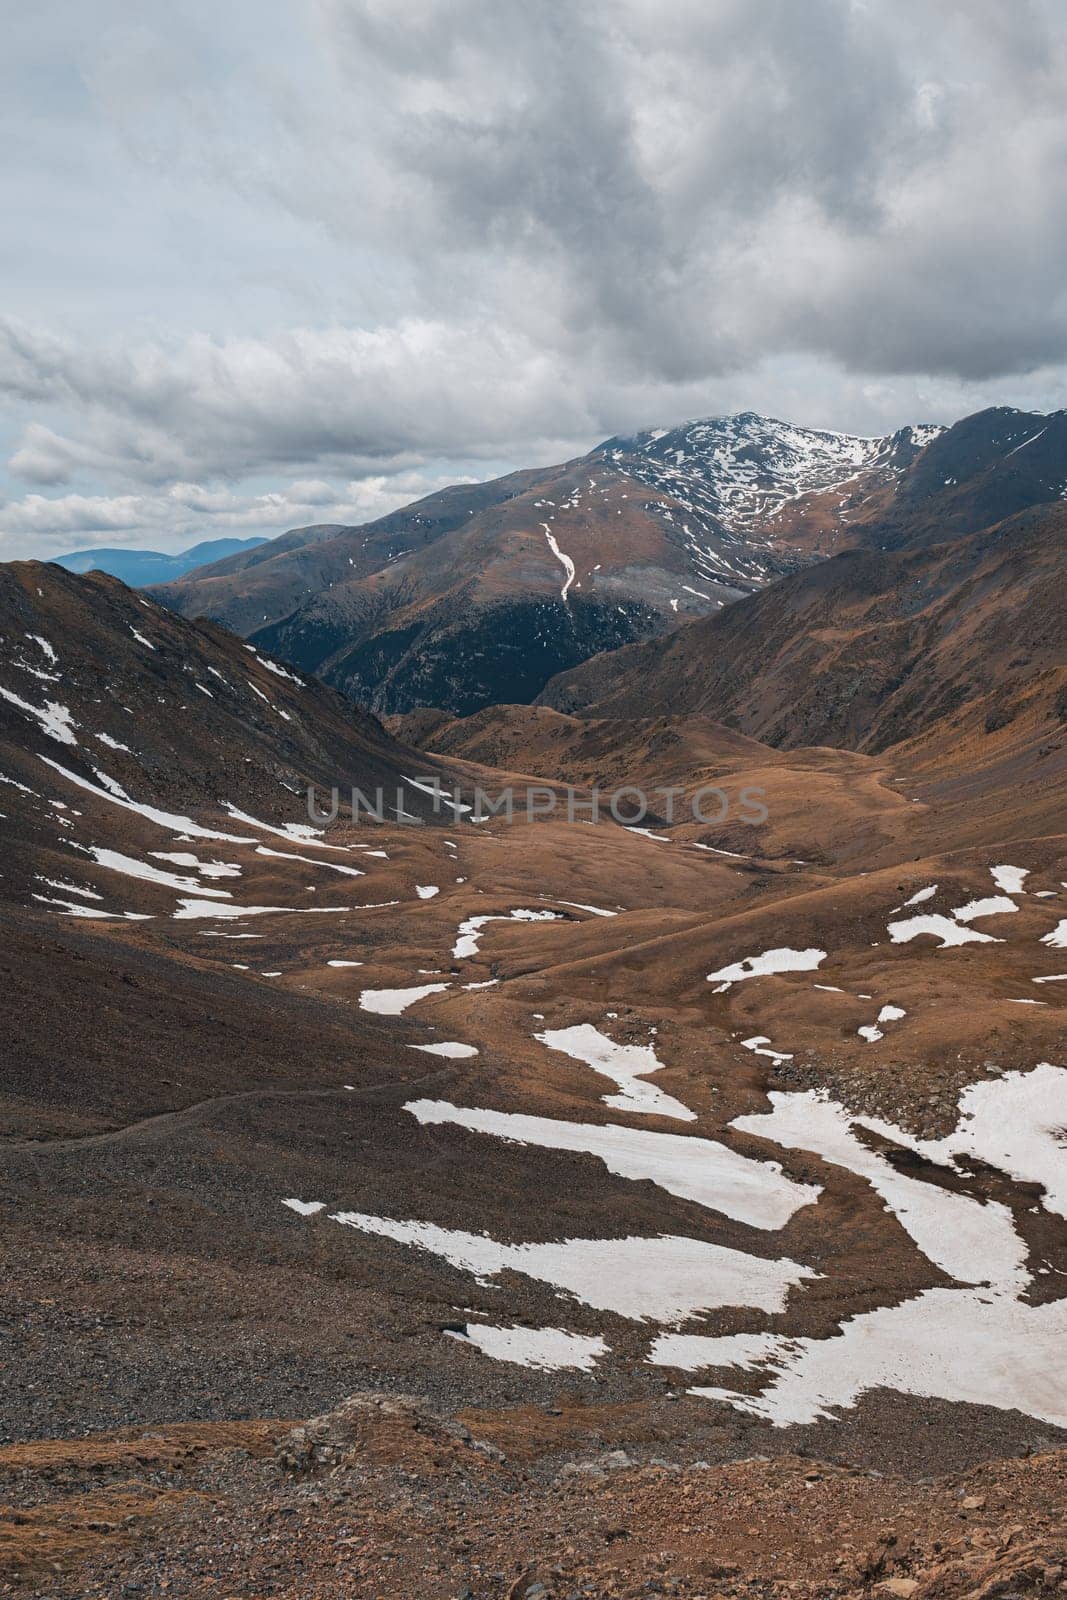 Vertical shot of a picturesque view of a snow-covered valley among the Pyrenean slopes on a cloudy autumn day. The concept of the harsh mountainous Spanish nature.